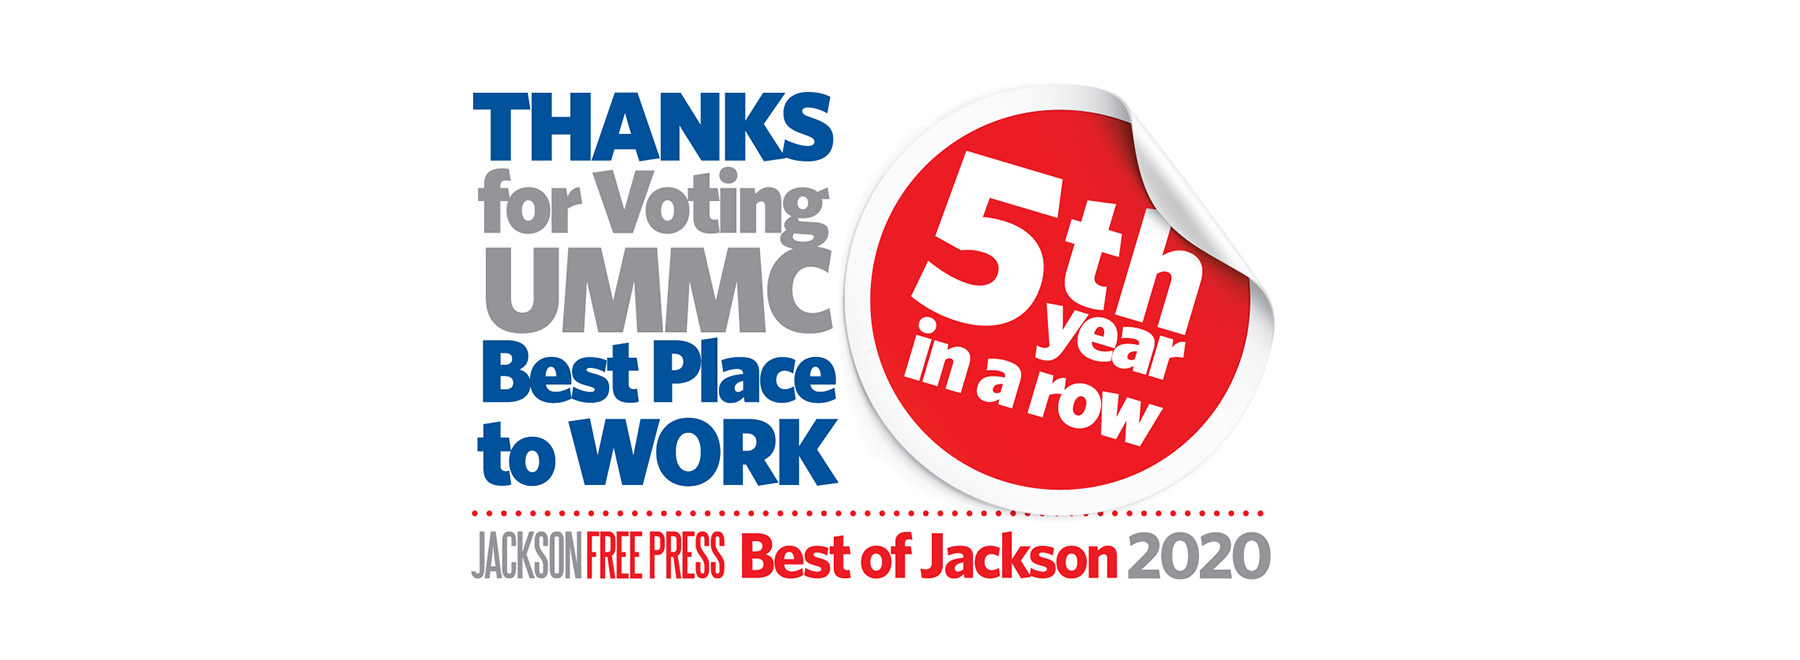 Thanks for voting UMMC Best Place to Work 5th year in a row. Jackson Free Press, Best of Jackson 2020.